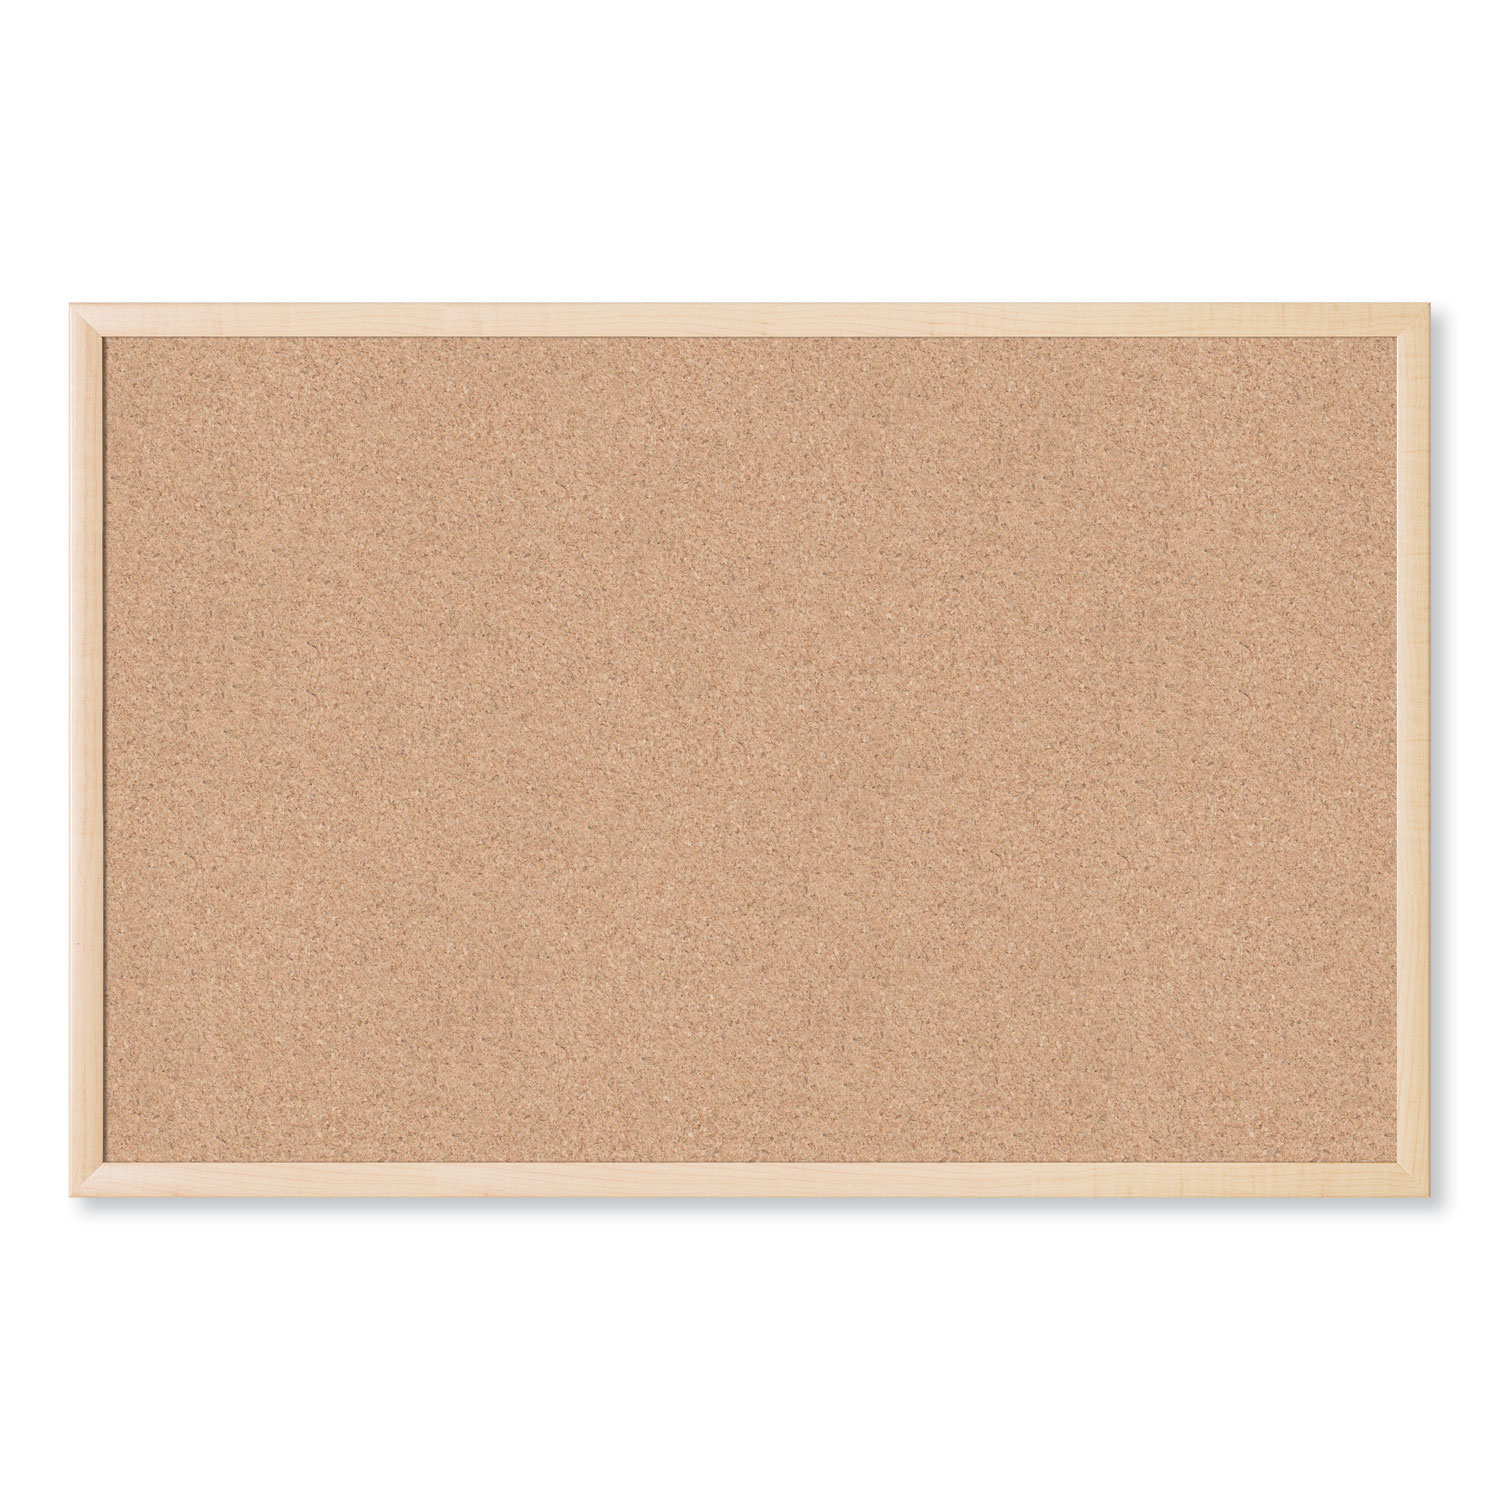 Post it Sticky Cork Bulletin Board 22 x 36 Aluminum Frame With